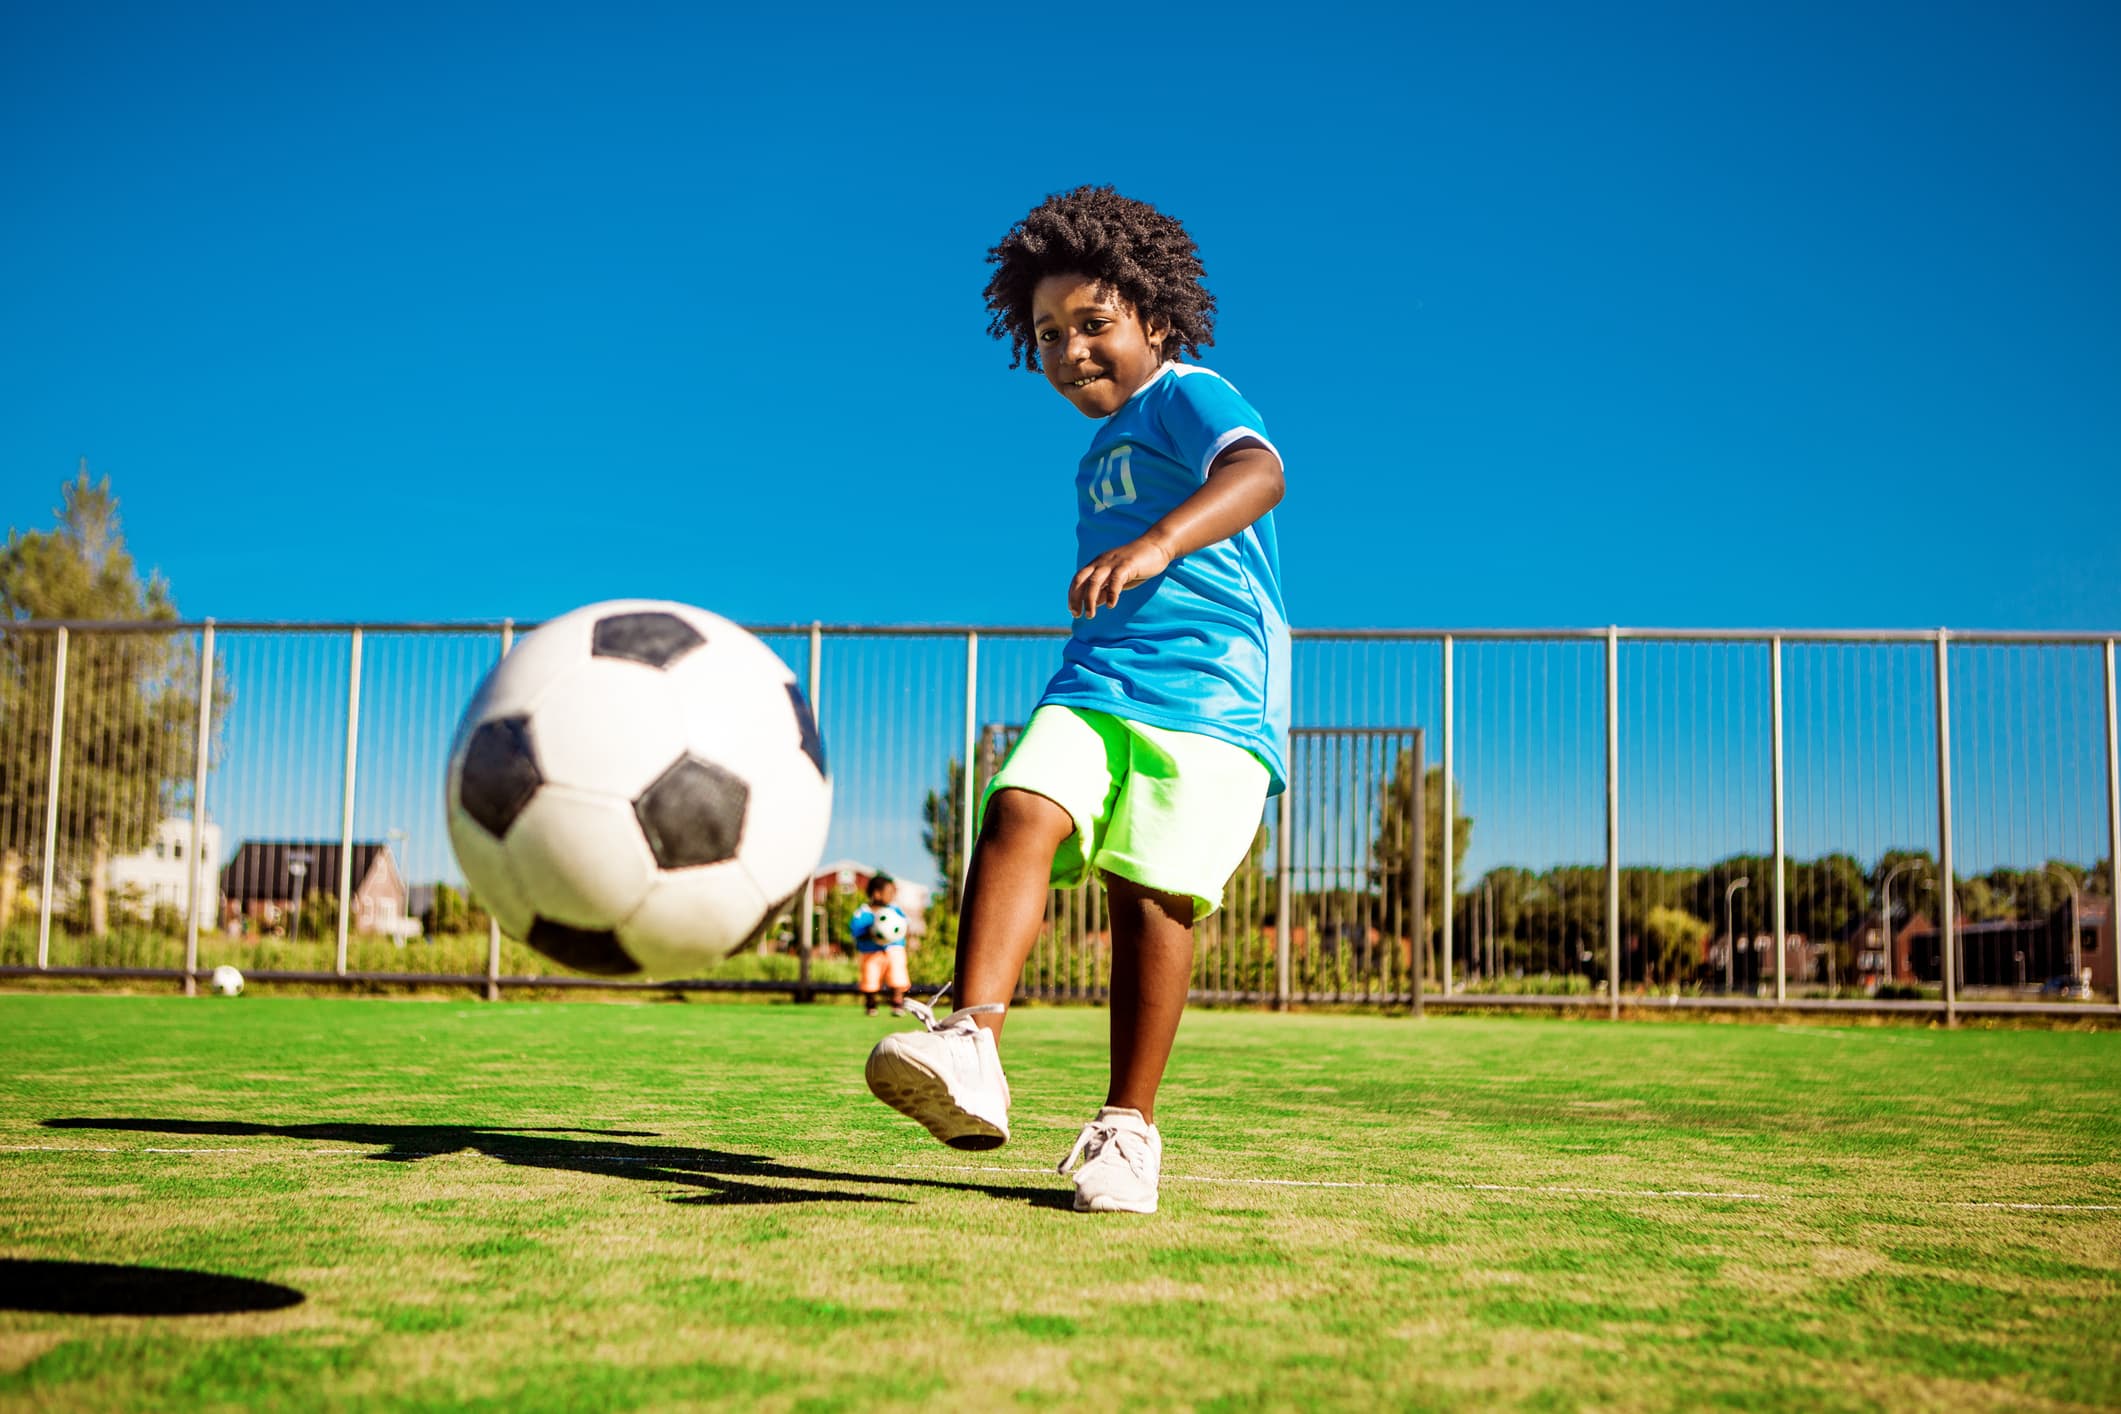 A young black boy child playing soccer on a neighbourhood football pitch on a beautiful sunny day in the Netherlands